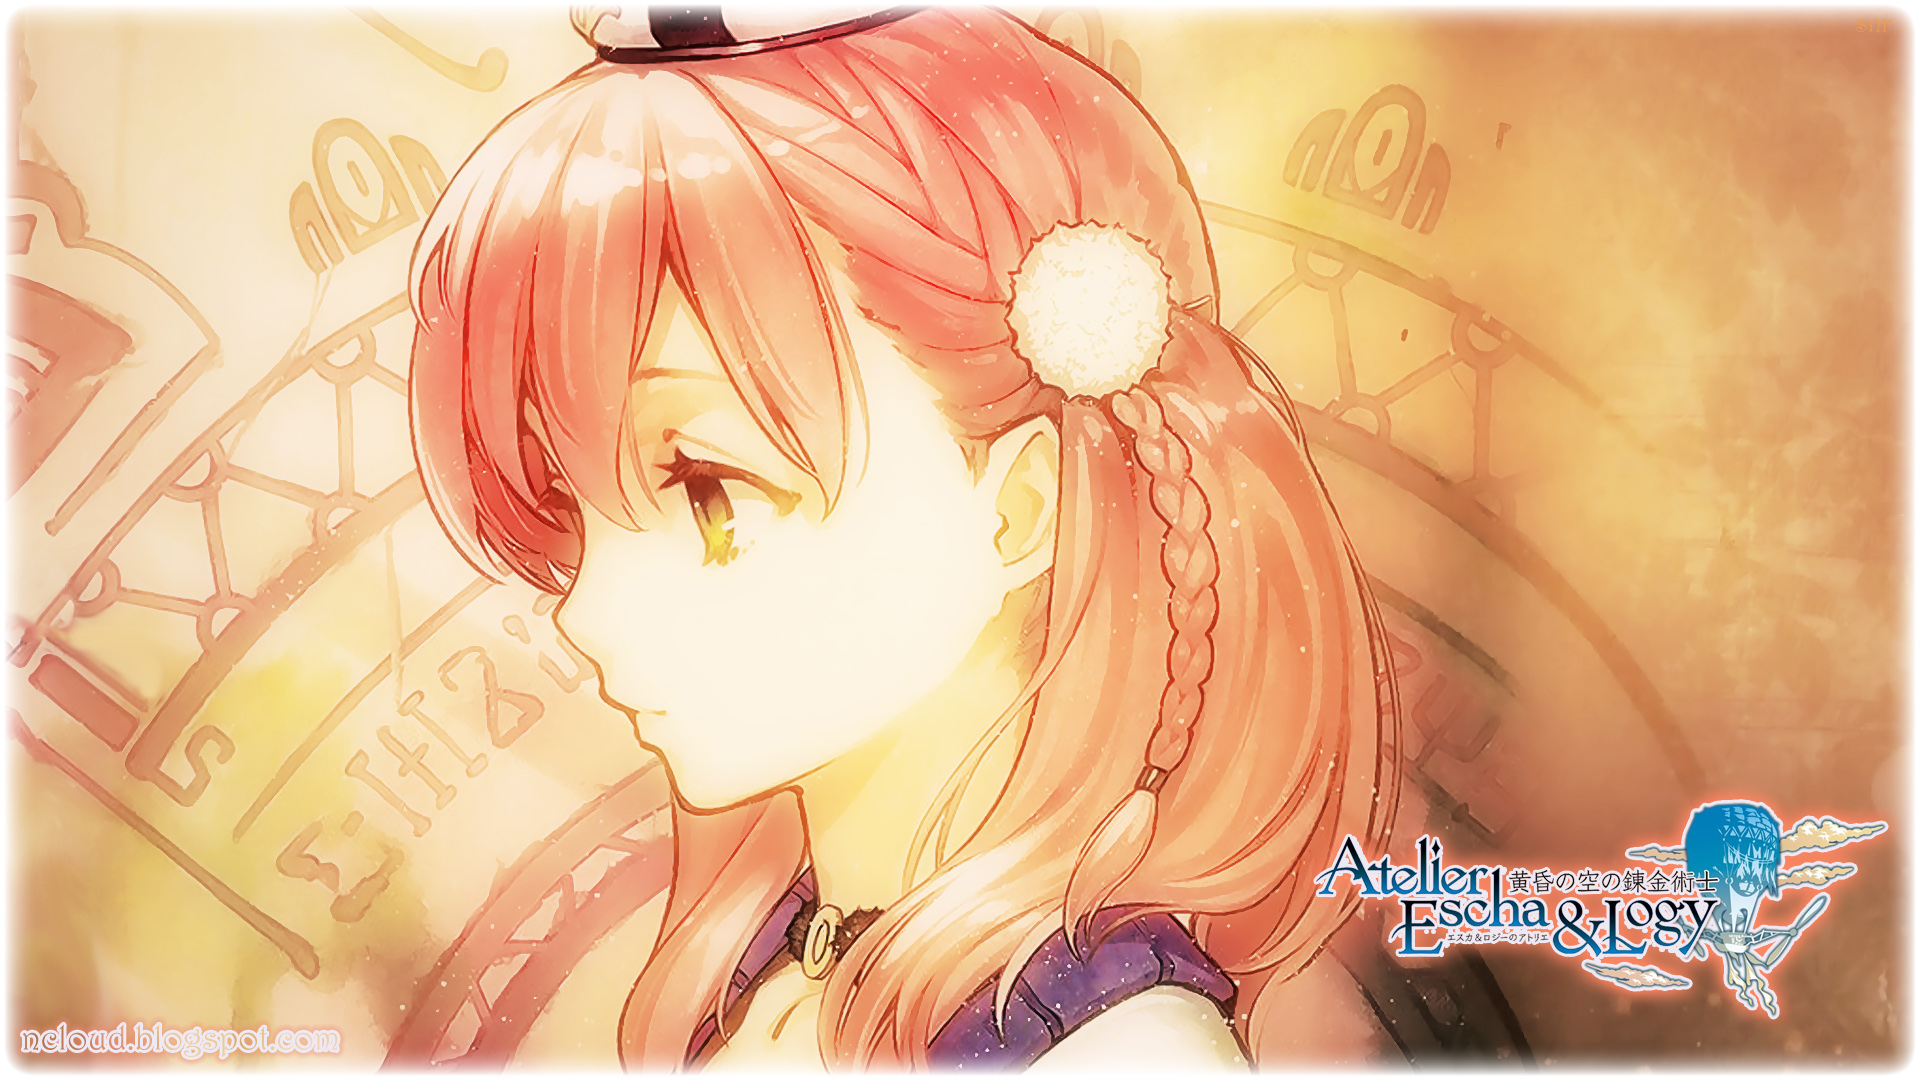 Games Movies Music Anime My Atelier Escha And Logy Wallpaper